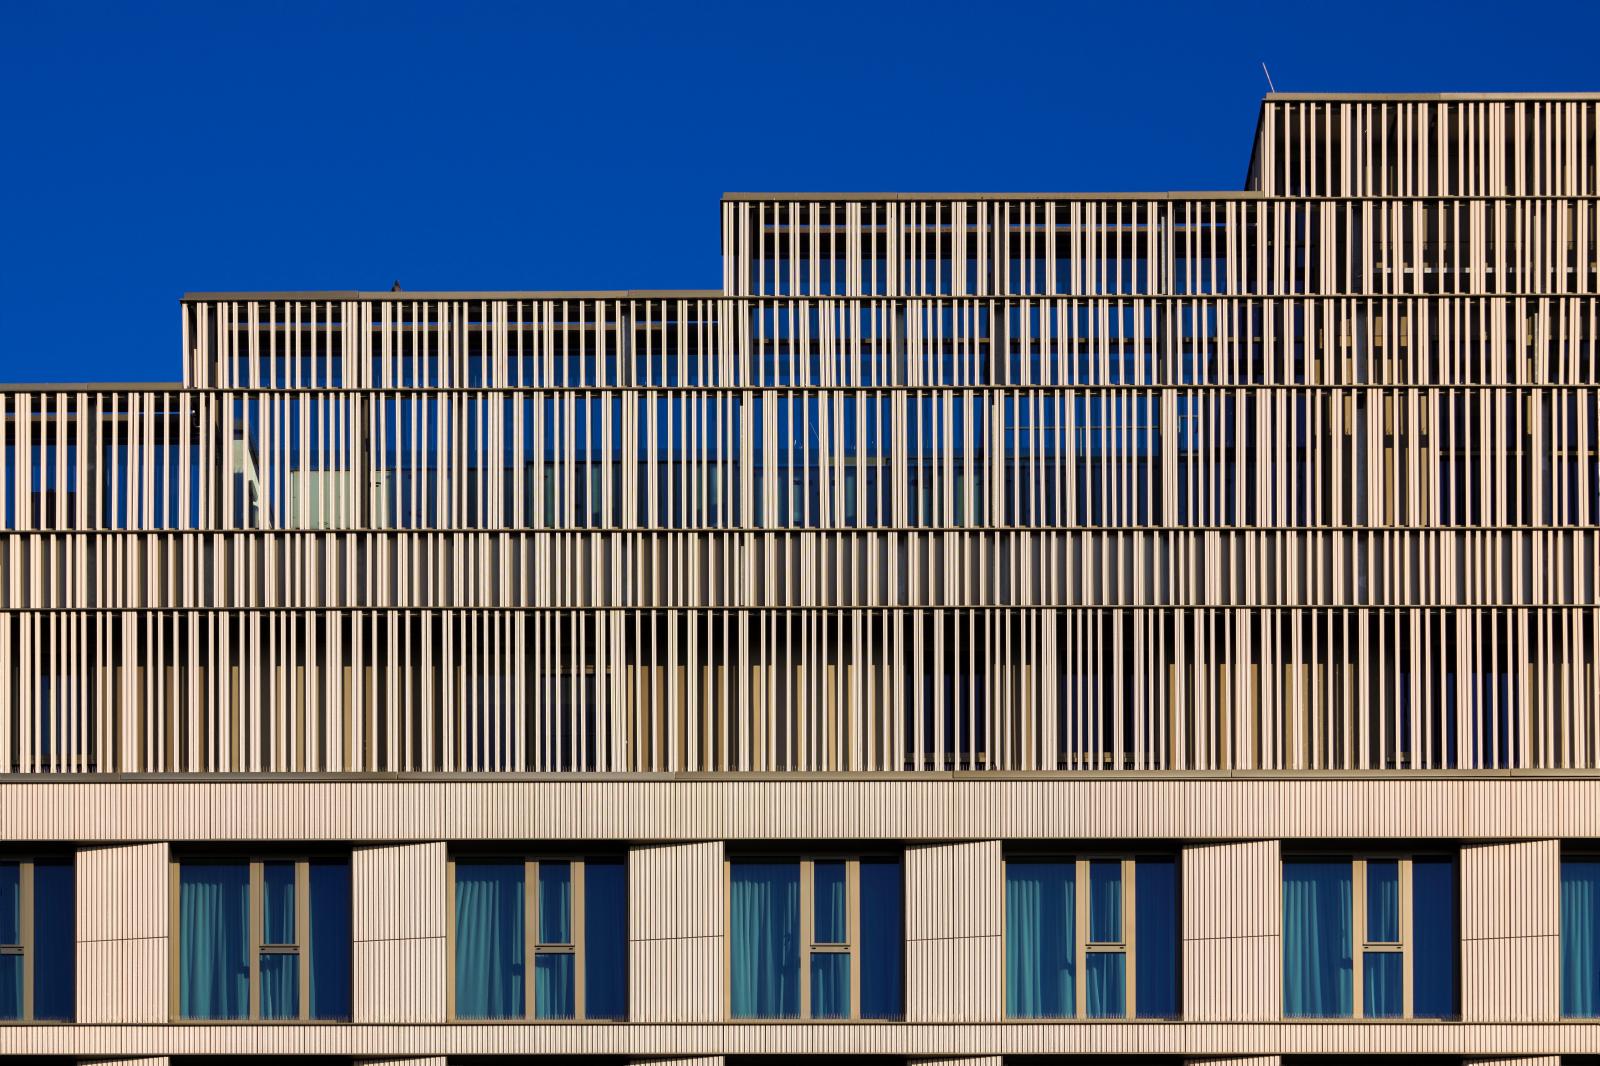 Image from New Photographs -  Ulm, Germany   # 4130 1/2024 Architectural Harmony:...